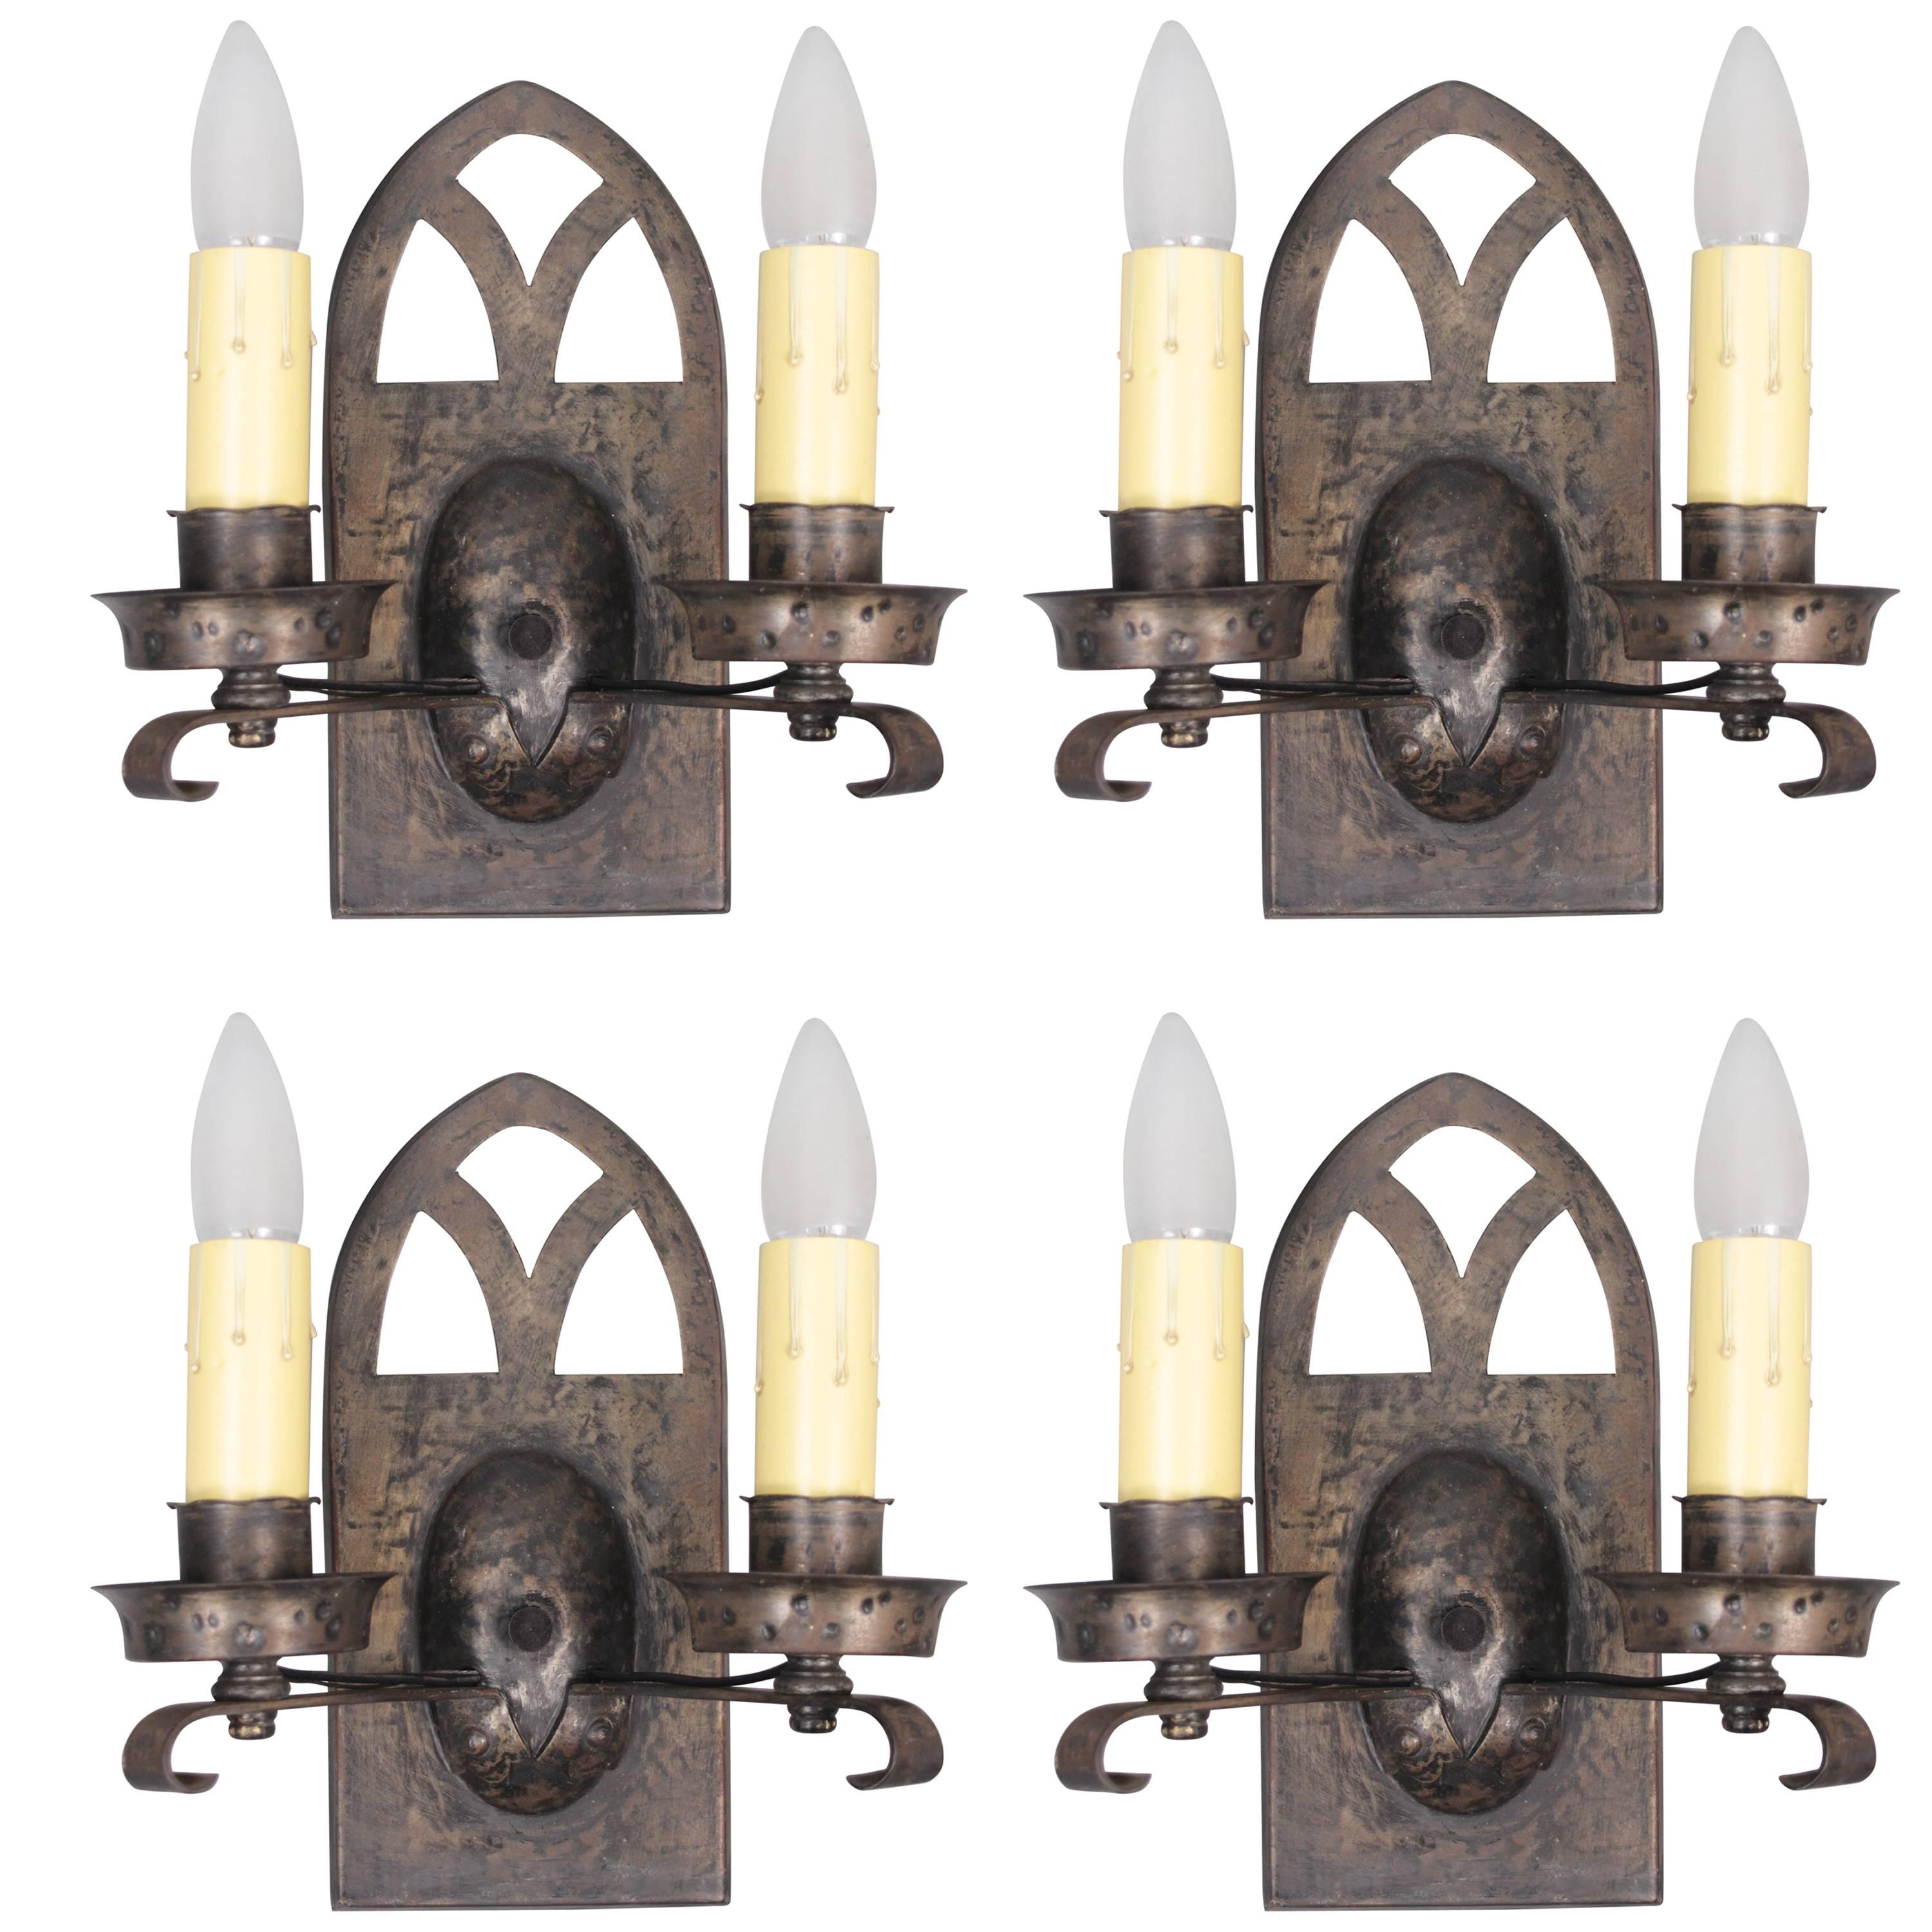 One of Four Spanish Revival Double Light Sconces with Arched Top